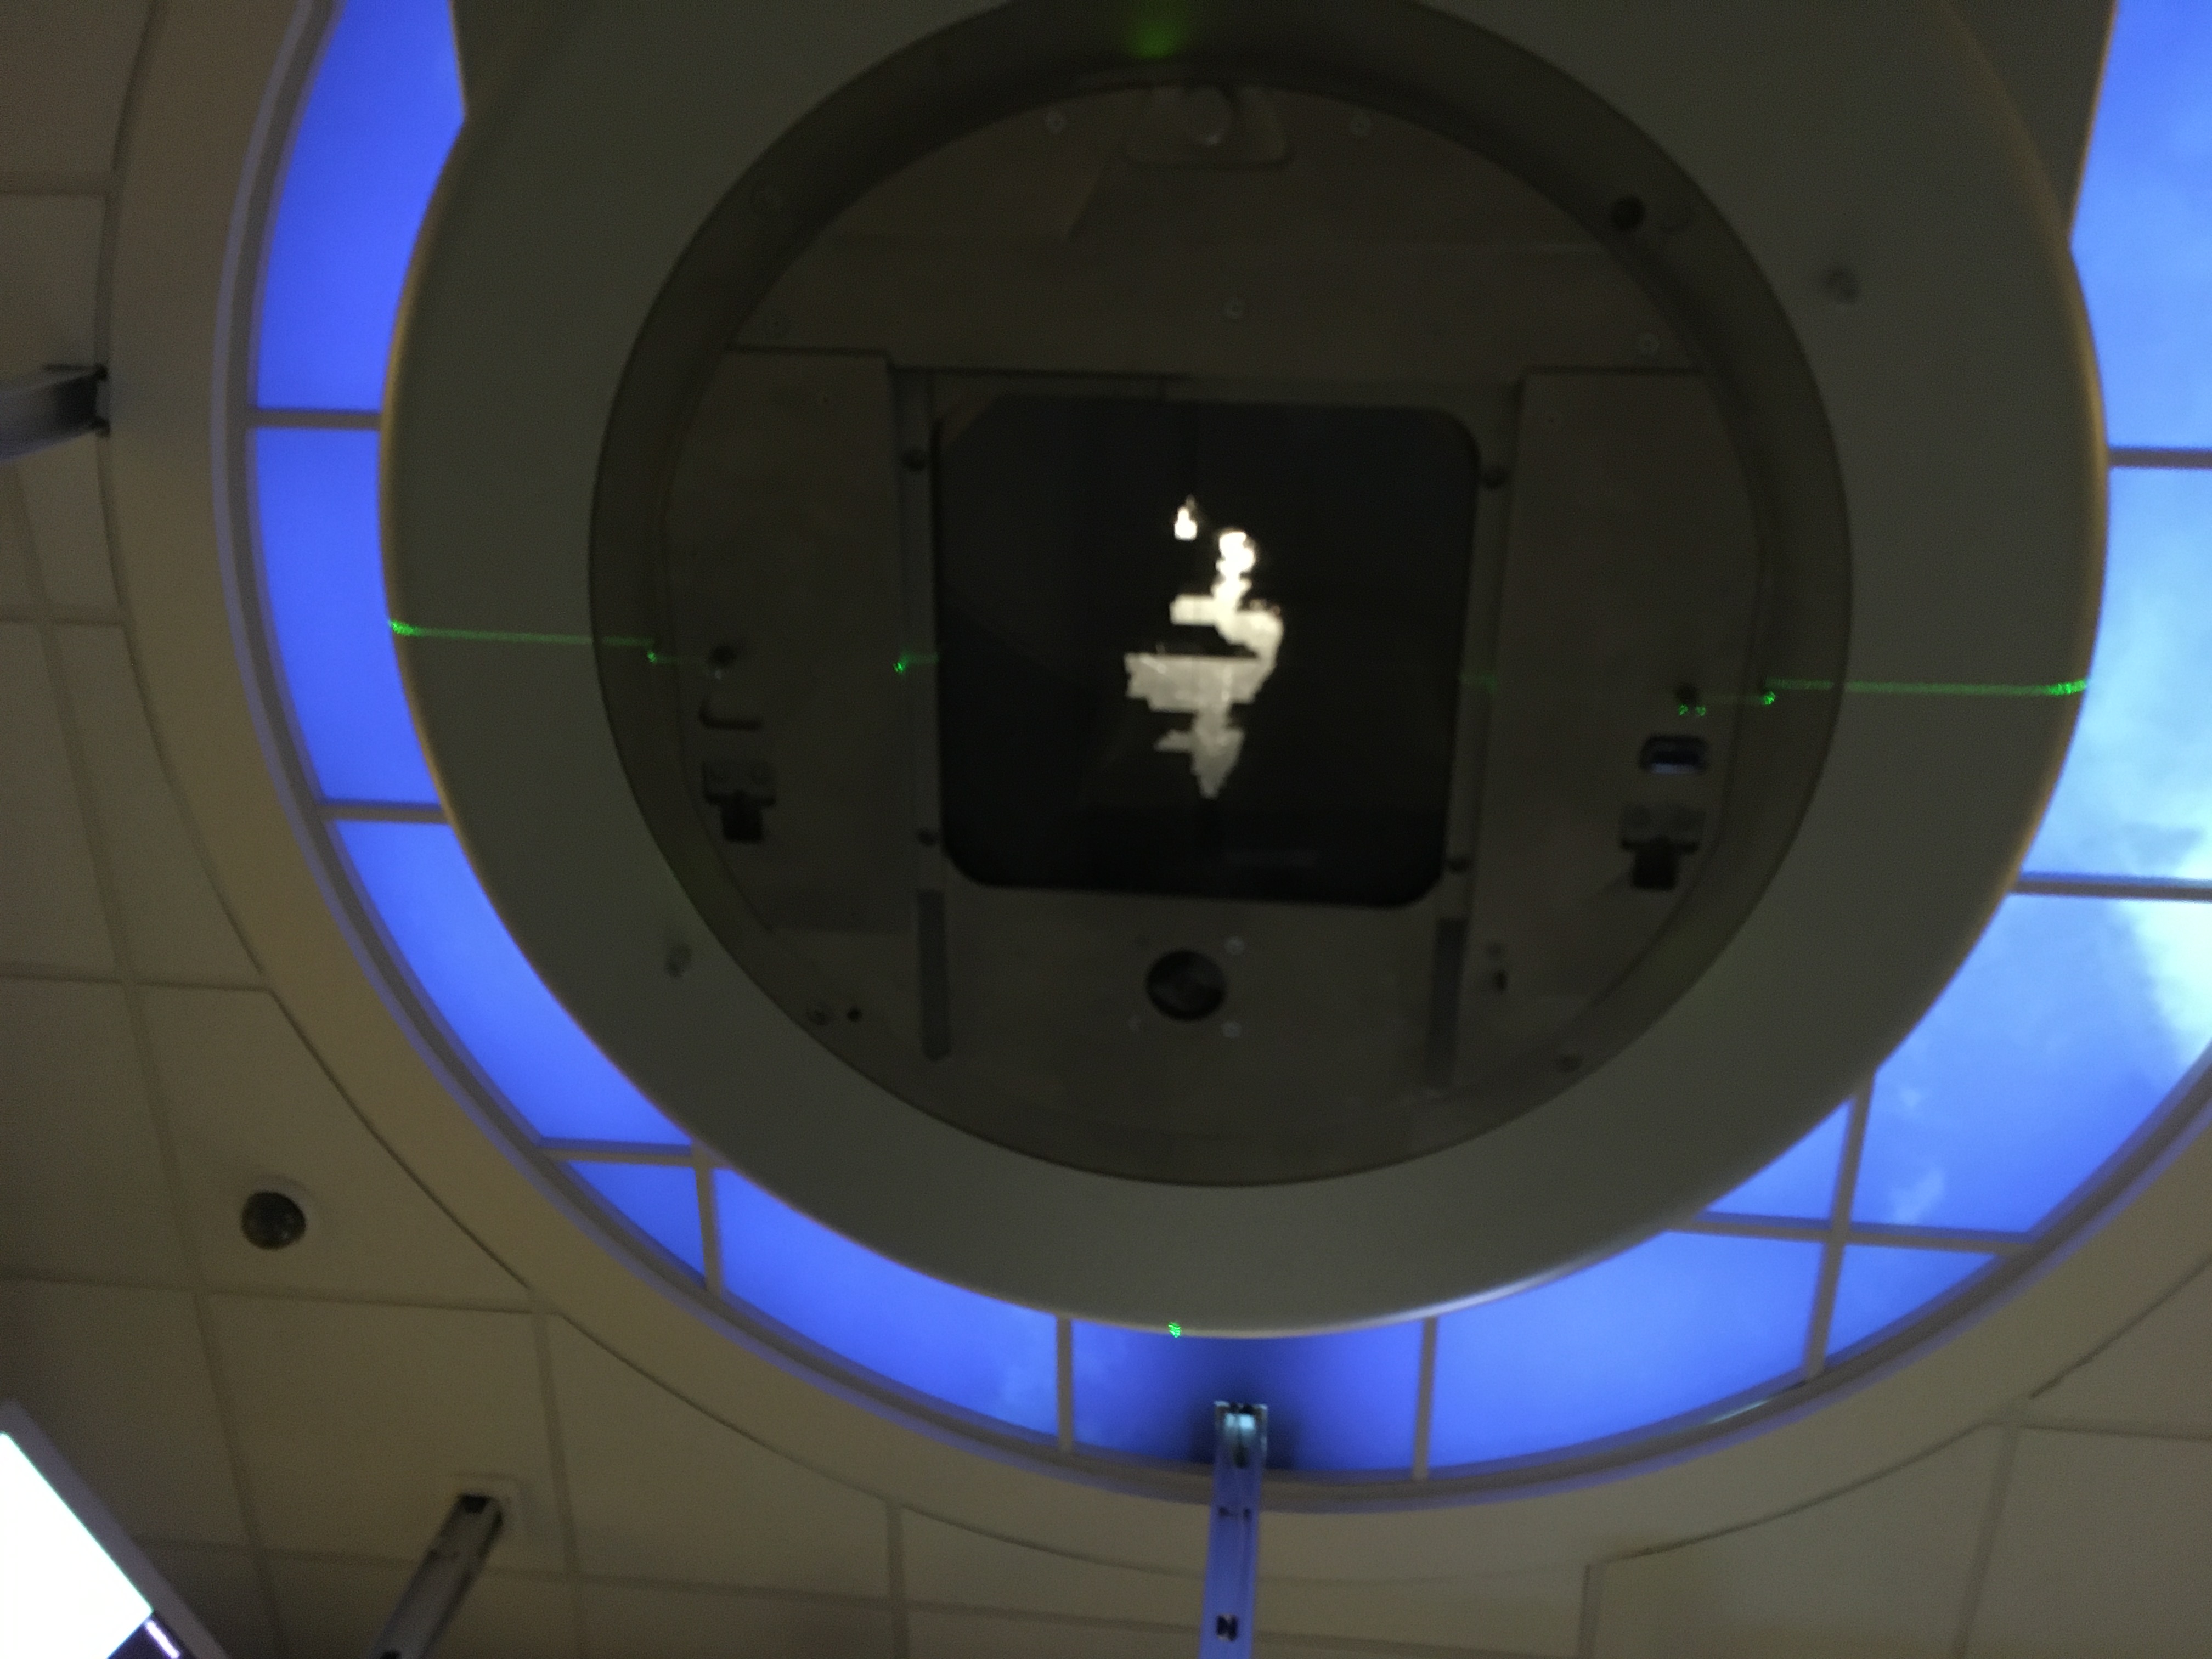 A picture looking up at a radiation machine device, as though from in the machine. There's a shape of light with odd edges shining through a dark rectangle, within circular panel.